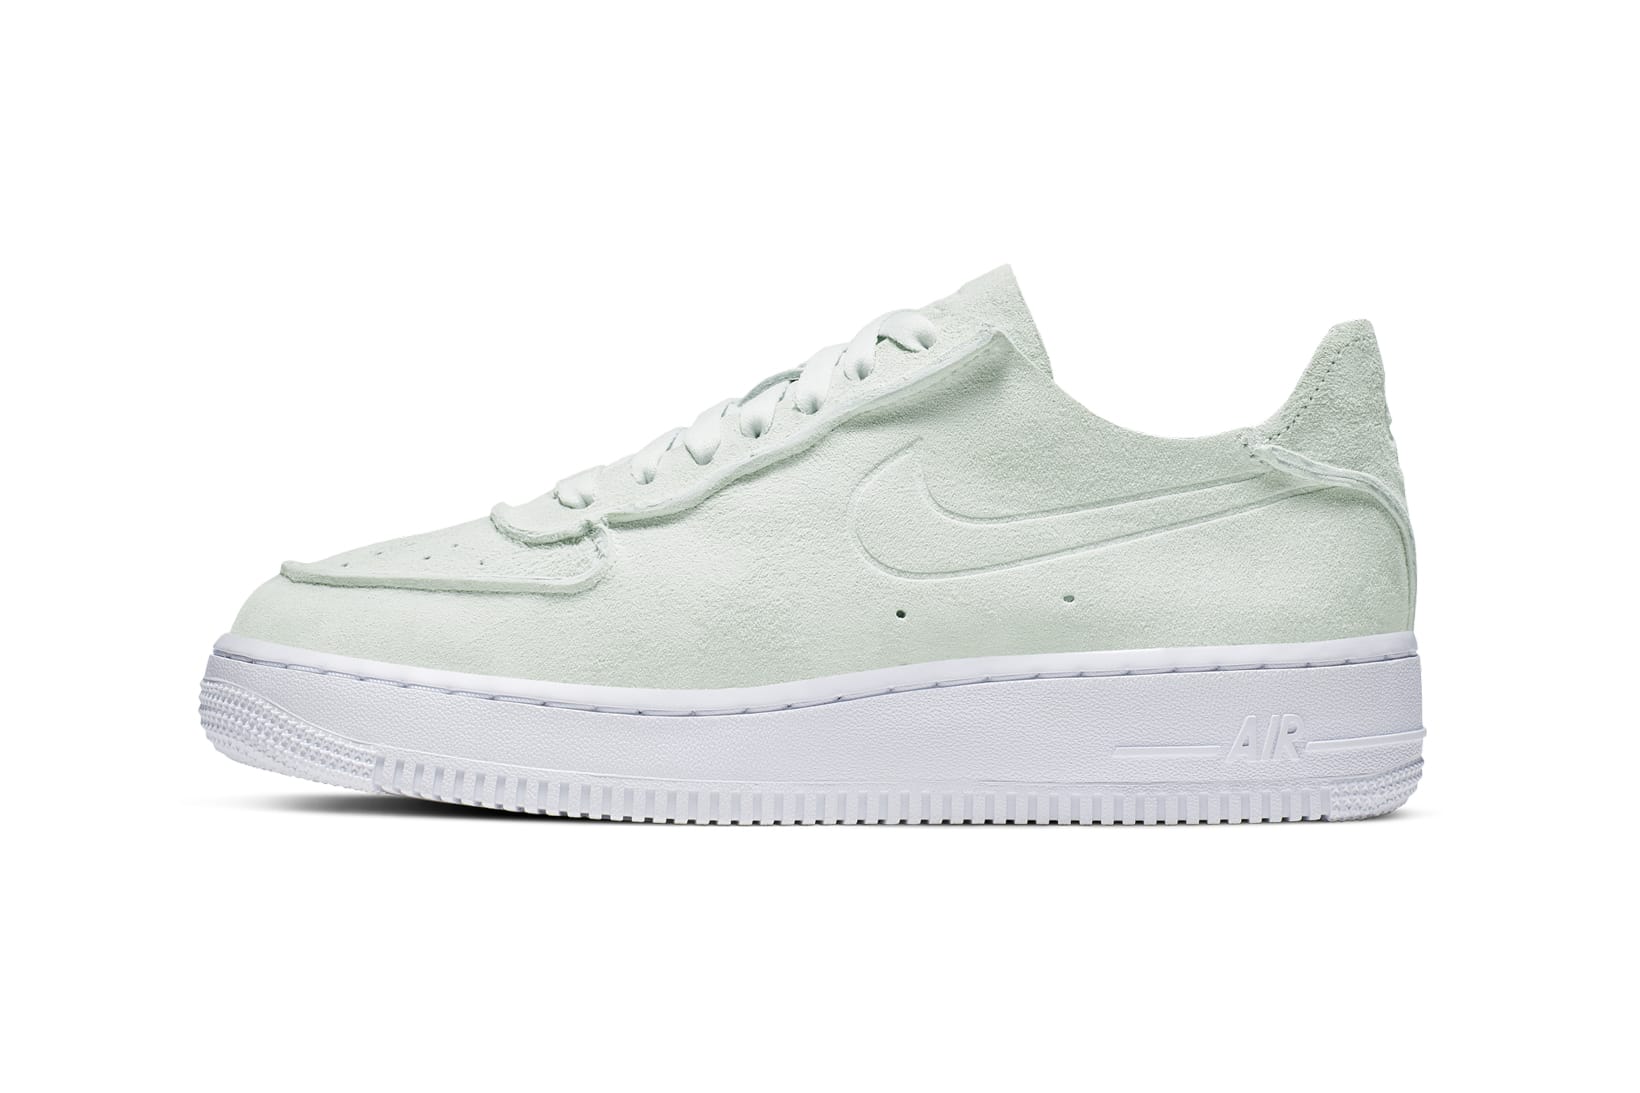 green suede air force ones